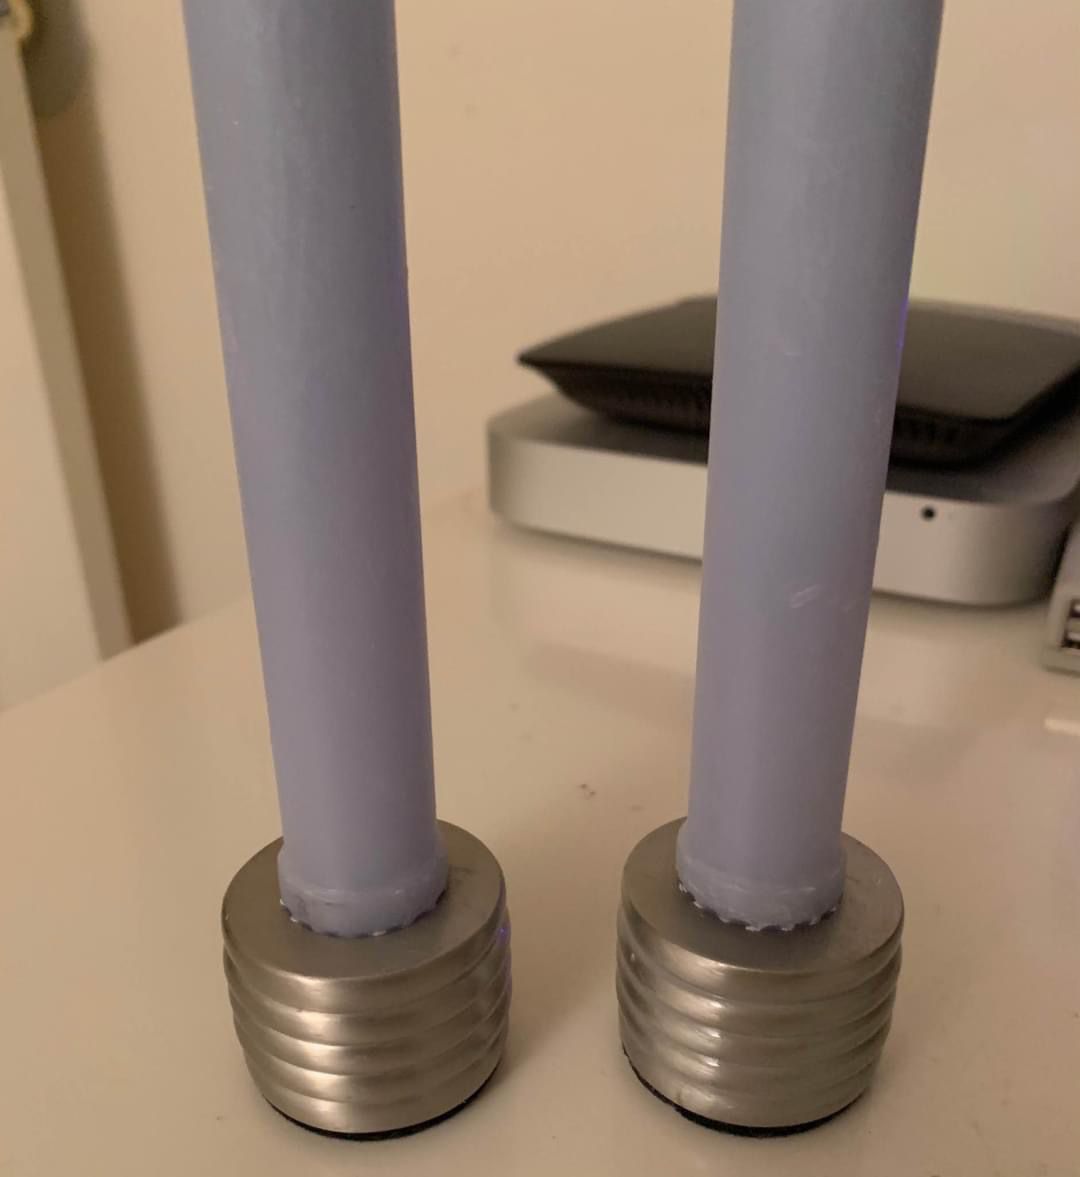 2 Candle Holders with 6 Dinner Candles